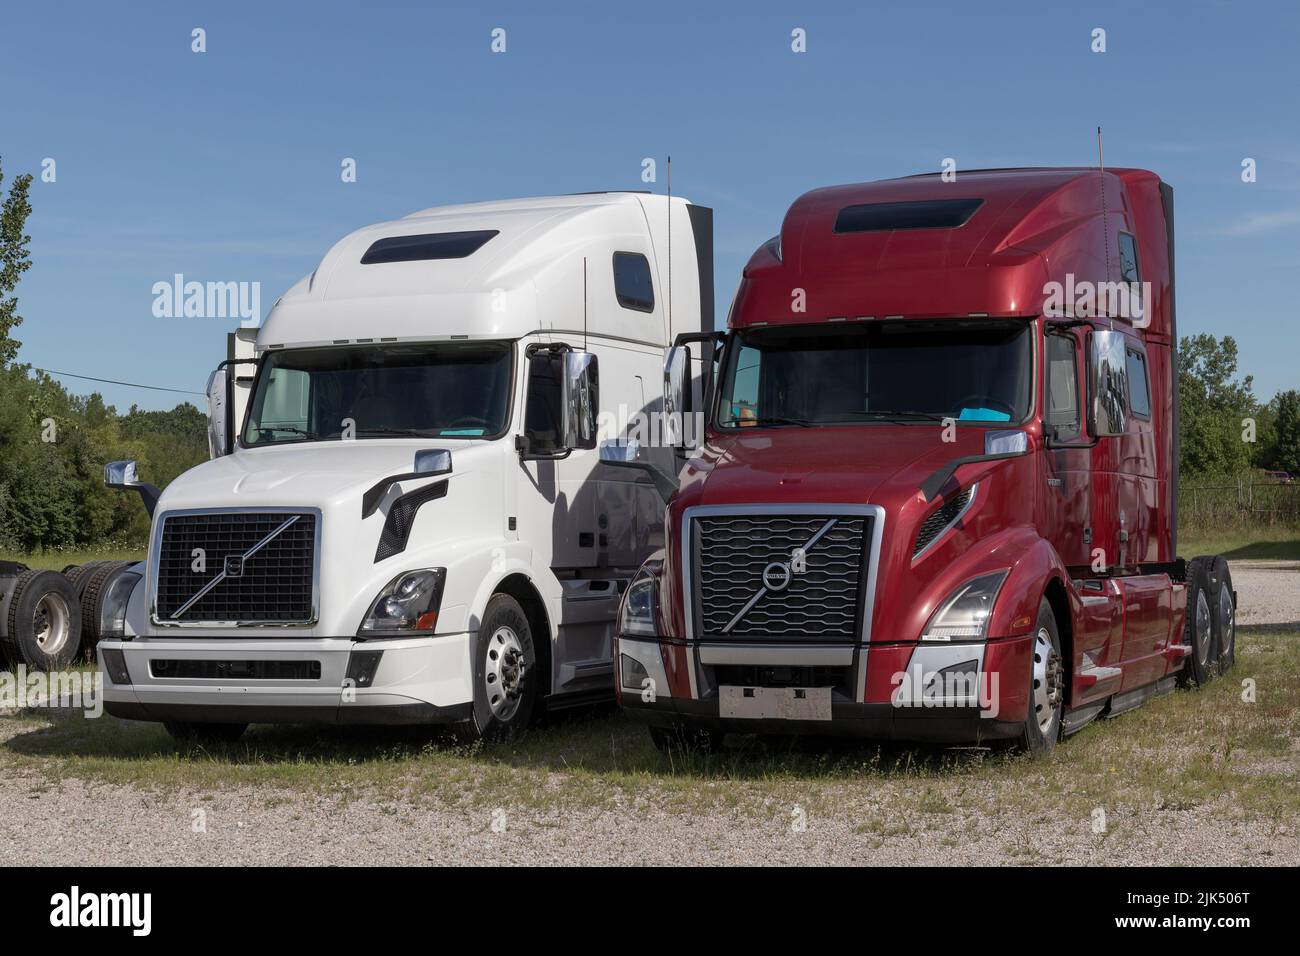 Indianapolis - Circa July 2022: Volvo Semi Tractor Trailer Big Rig Truck display at a dealership. Volvo Trucks is one of the largest truck manufacture Stock Photo